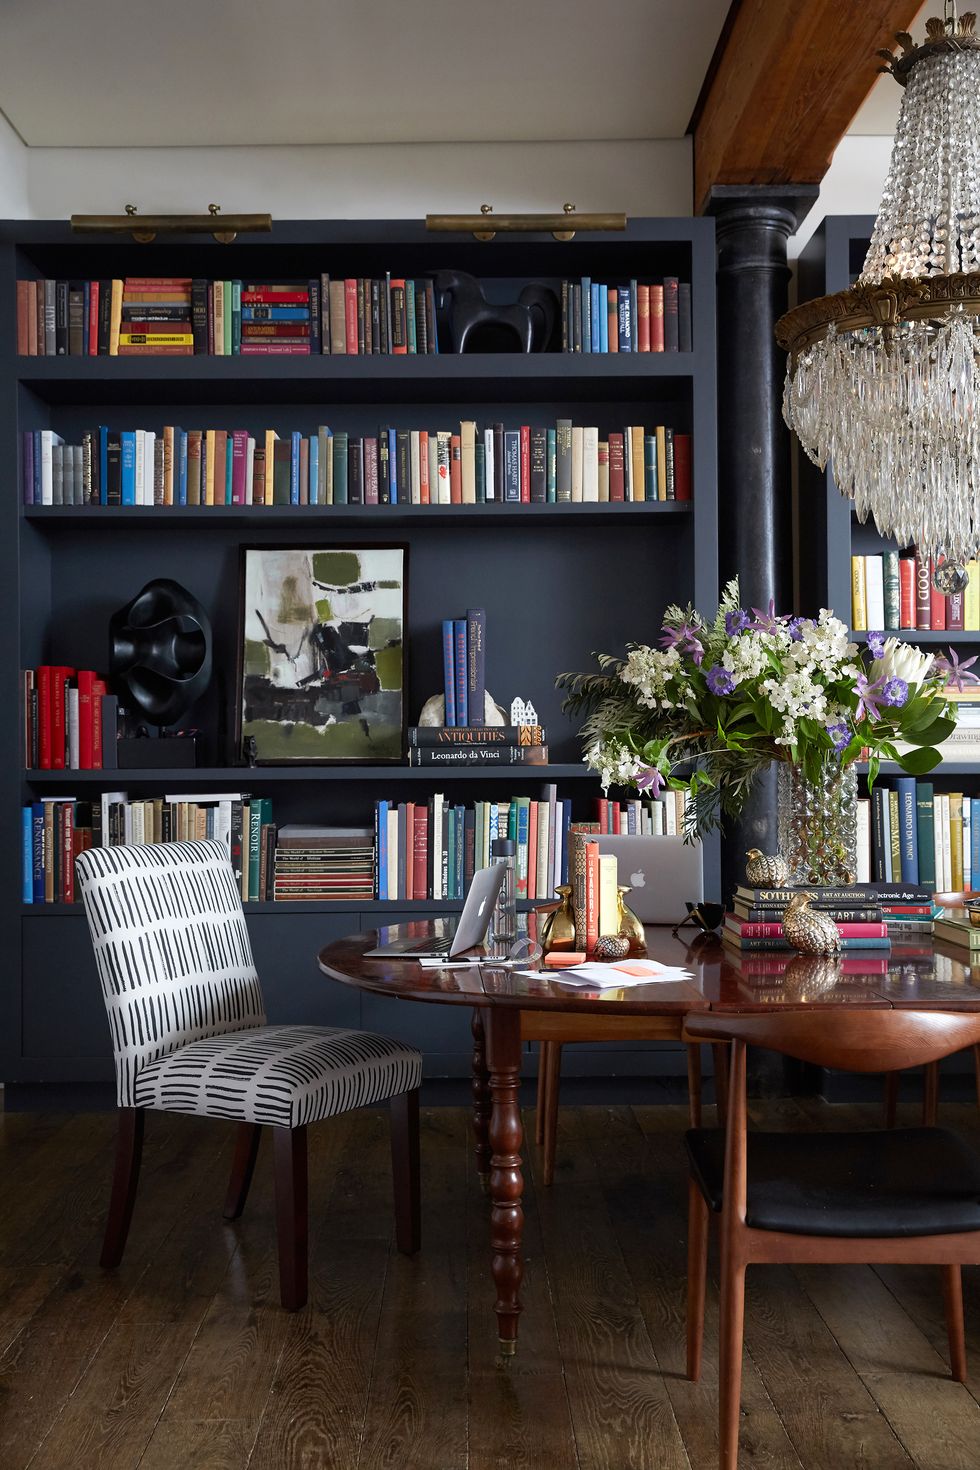 <p>"A very simple and effective way to update your space&nbsp;for fall is gorgeous dark paint. I recently painted my office a deep blue black&nbsp;from <a href="https://www.instagram.com/farrowandball/" target="_blank">@farrowandball</a>.&nbsp;I love it and it&nbsp;makes the space bigger and much more dramatic.&nbsp;Don't be afraid–it's a great design trick to create a gorgeous and&nbsp;memorable interior.&nbsp; It's also&nbsp;visually stunning to have contrasting upholstery, like this dash print on a&nbsp;chair I designed for my new line, <a href="https://www.onekingslane.com/sales/69796" target="_blank">Cloth &amp; Company</a>."</p><p><span class="redactor-invisible-space" data-verified="redactor" data-redactor-tag="span" data-redactor-class="redactor-invisible-space"></span></p>